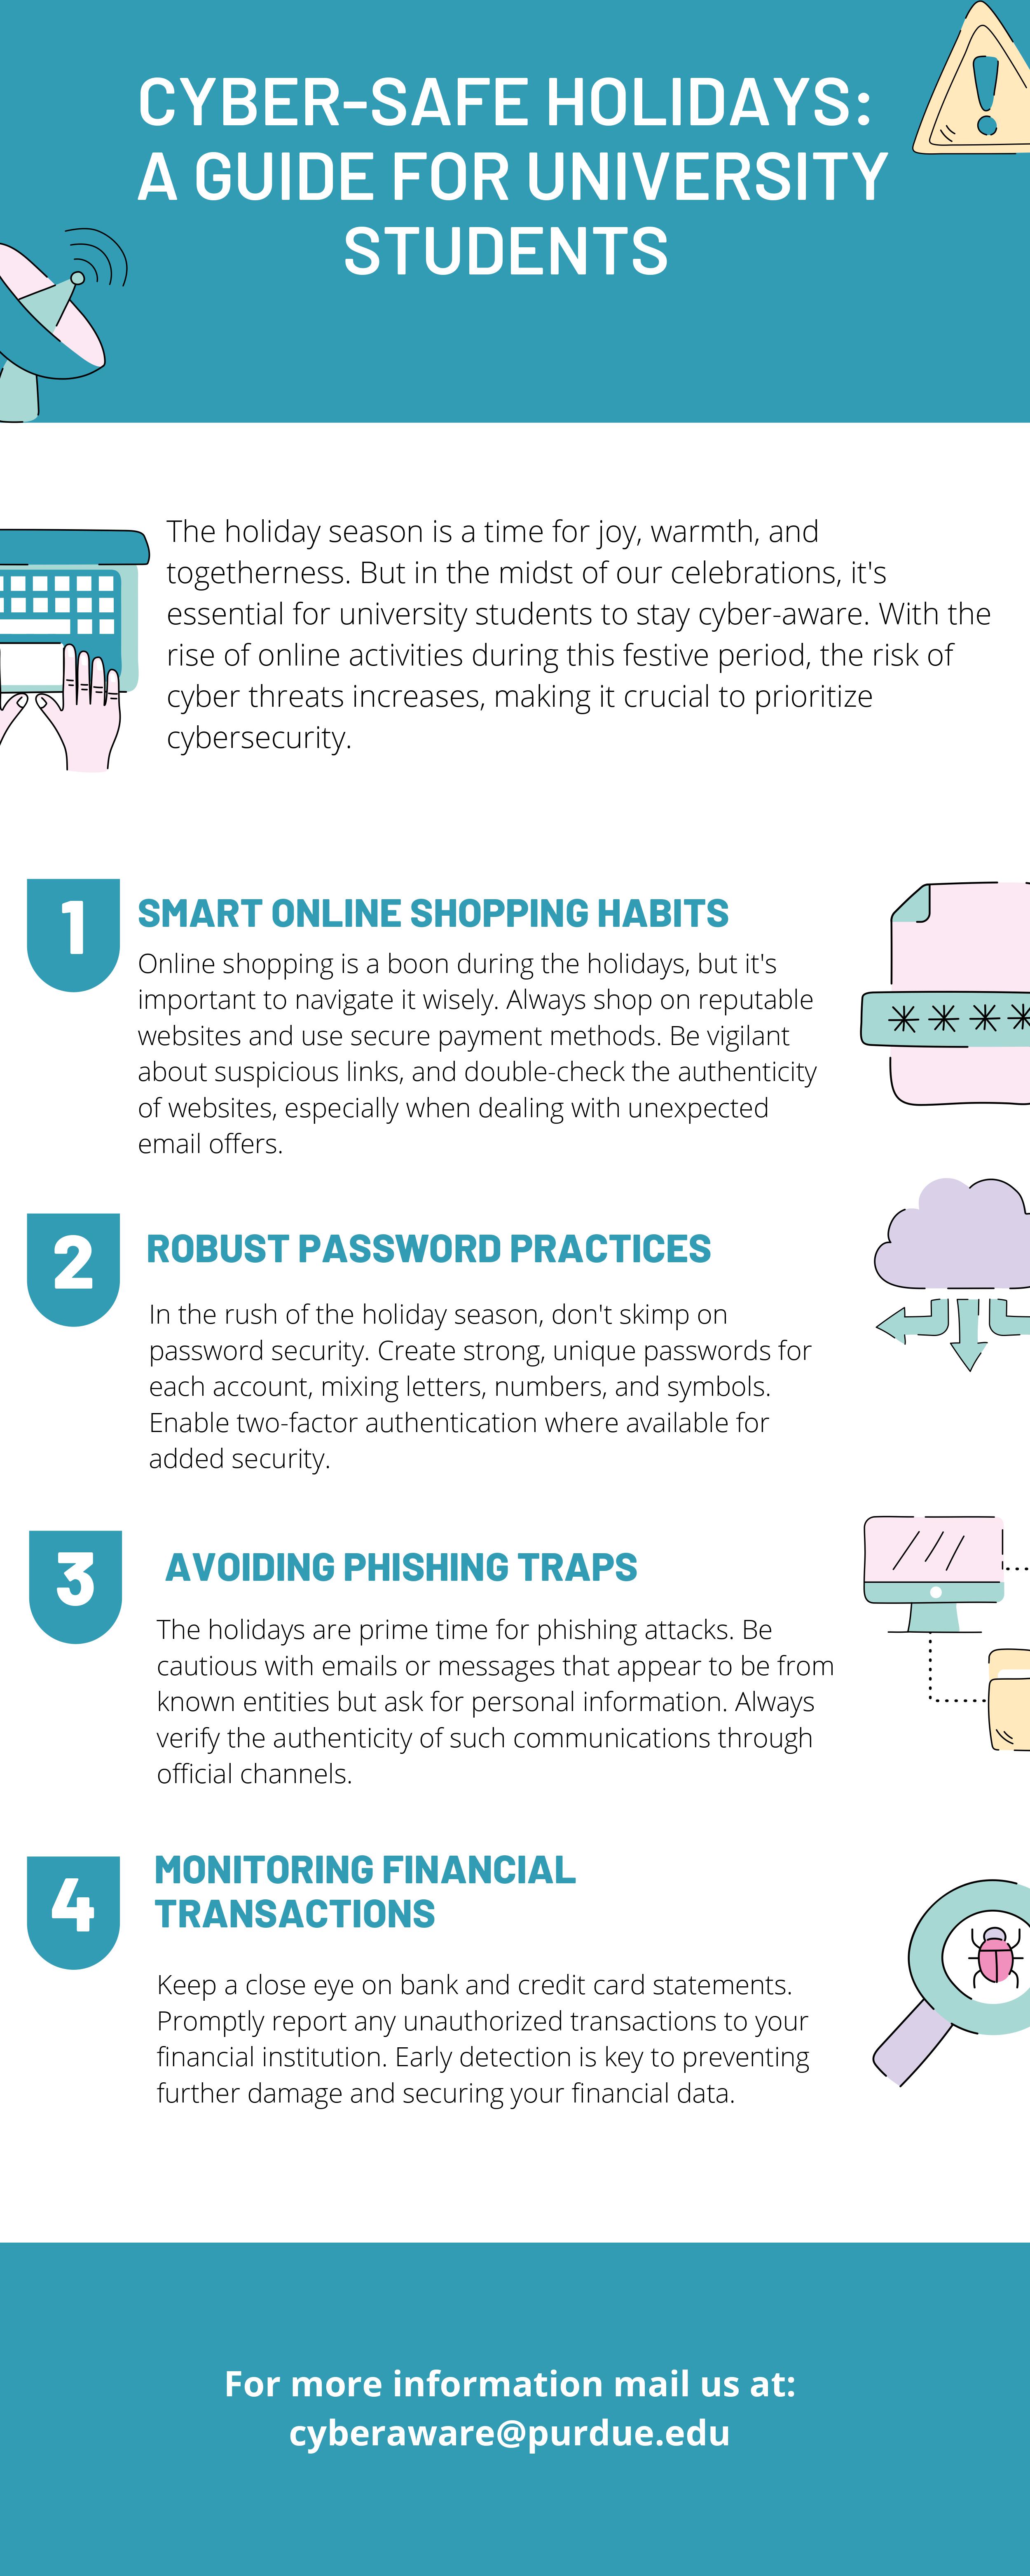 Cyber-Safe-Holidays-A-Guide-for-University-Students.jpg